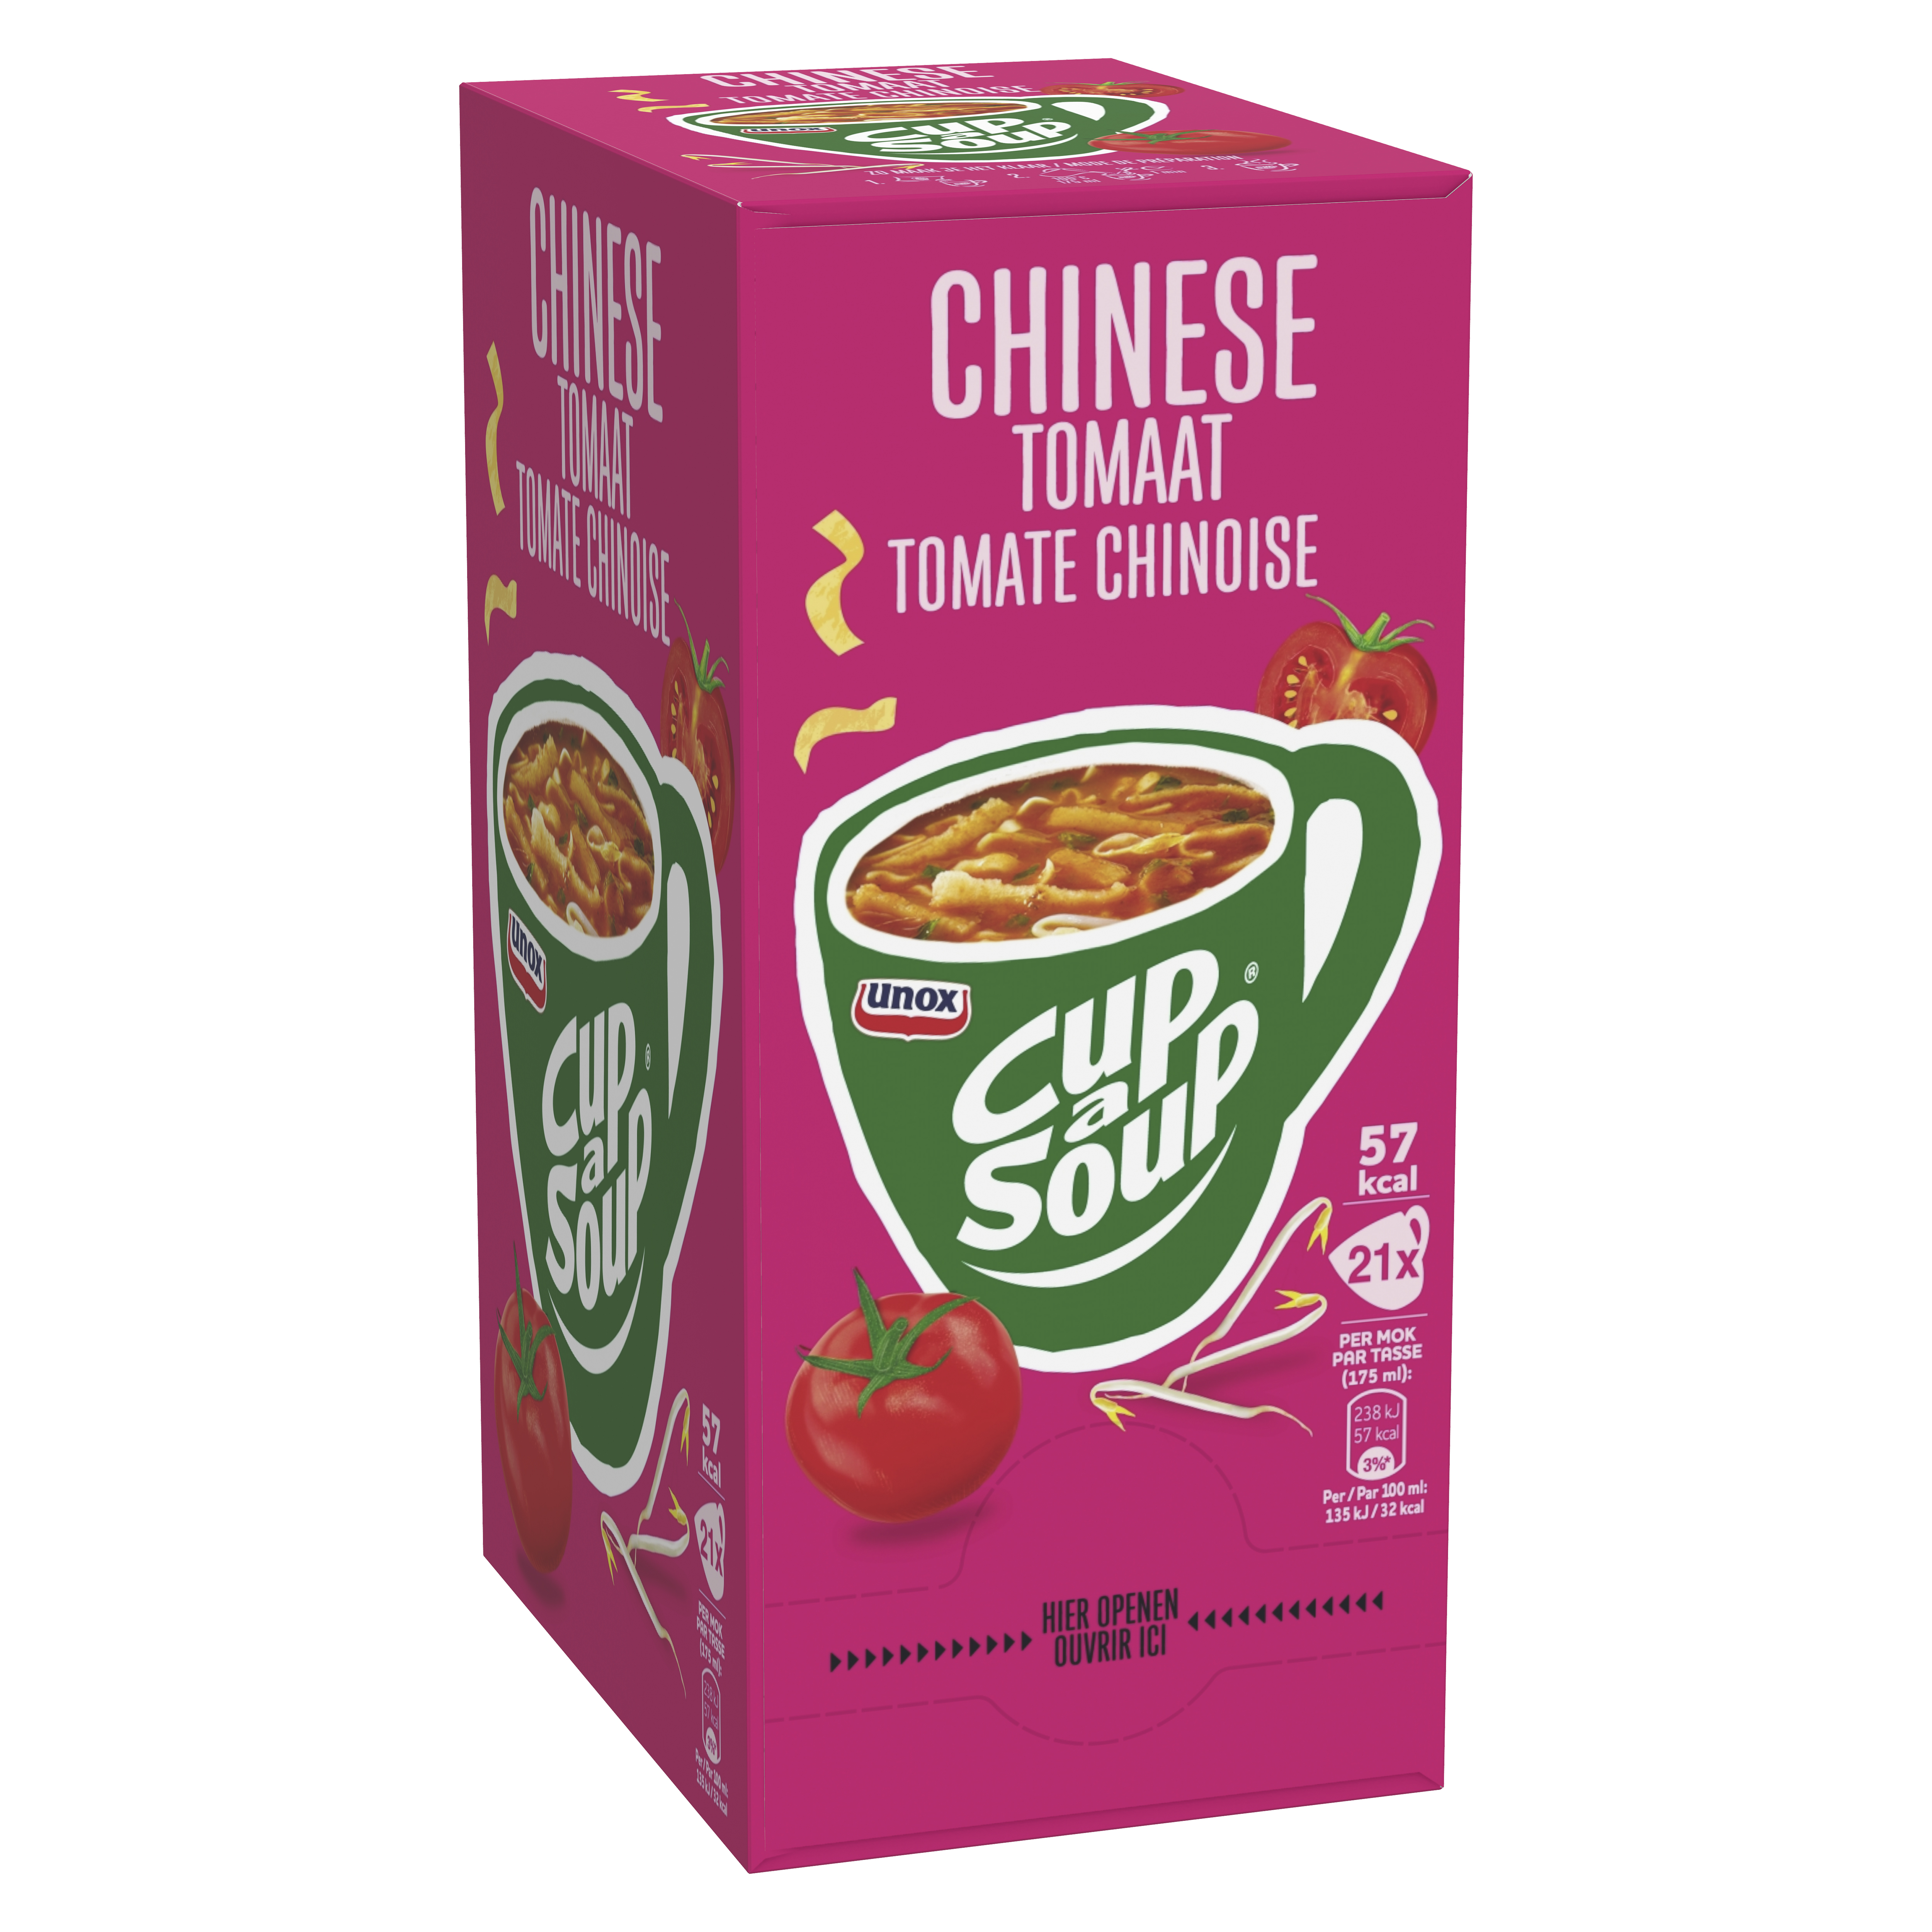 Cup-a-Soup Chinese Tomaat 175 ml